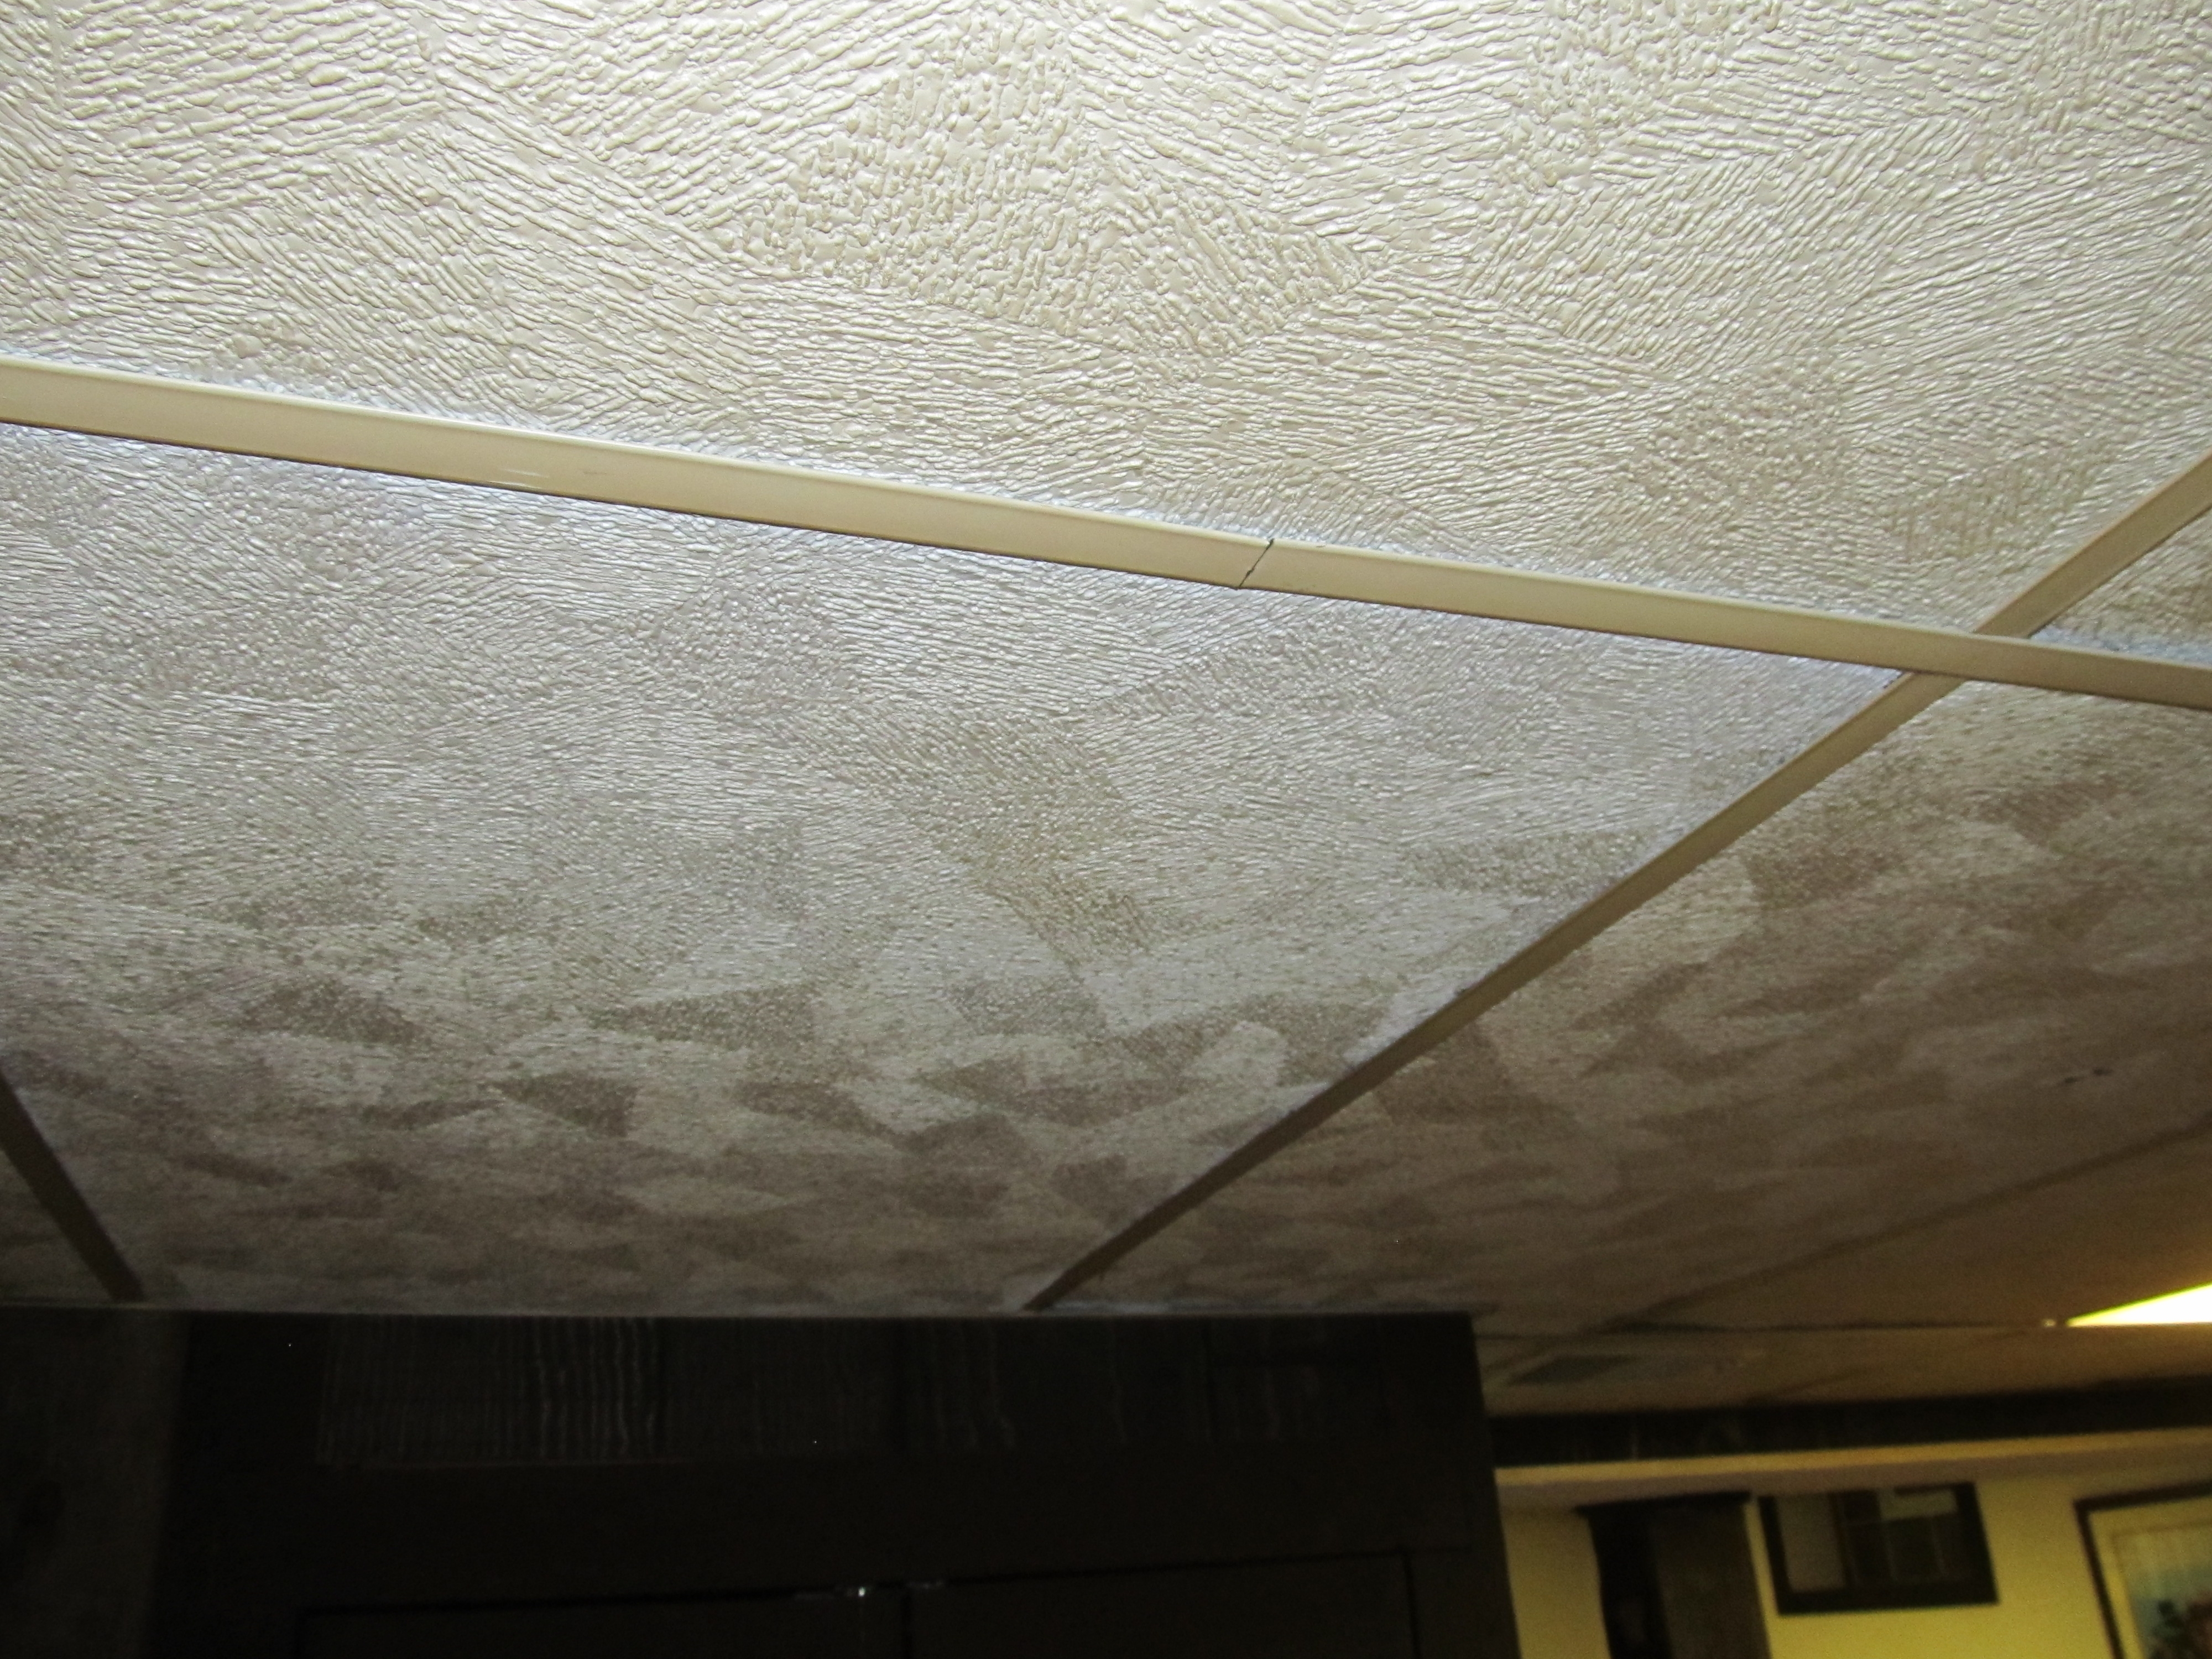 Covering Drop Ceiling Tiles With Fabric